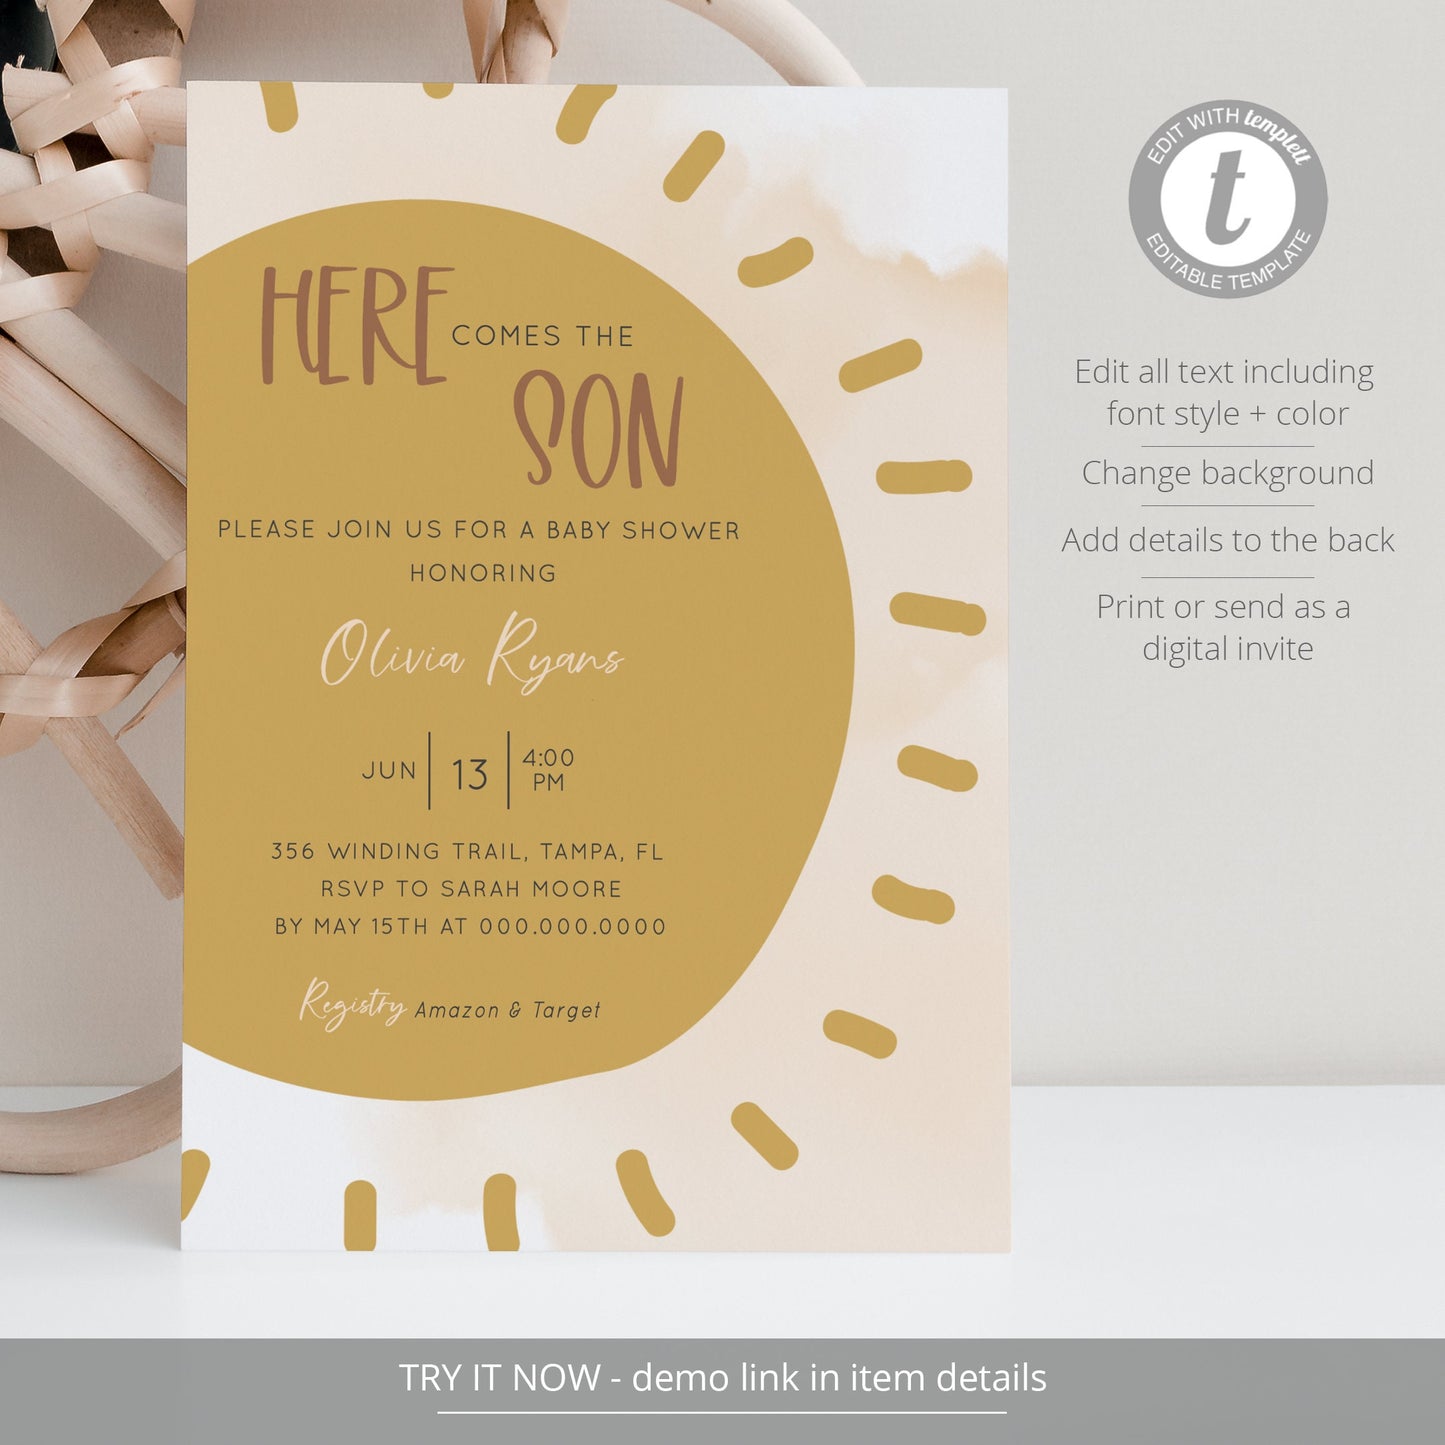 Editable Here Comes the Son Baby Shower Invitation Set Boho Sunshine Shower Invite Baby Shower Invitation Bundle Template